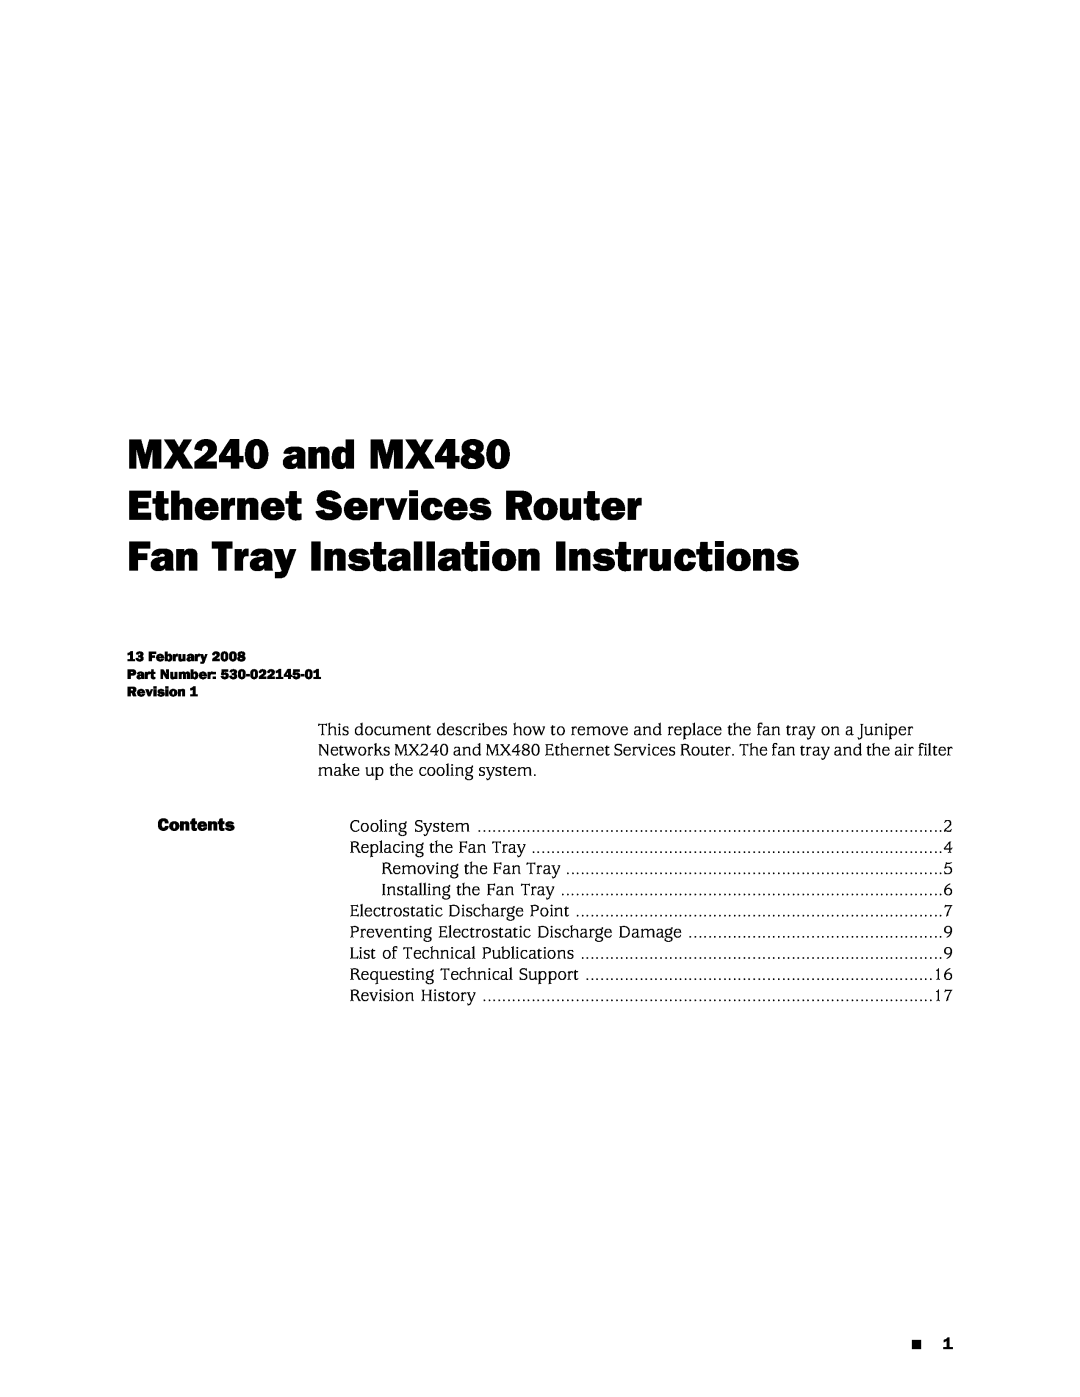 Juniper Networks installation instructions MX240 and MX480 Ethernet Services Router, Fan Tray Installation Instructions 